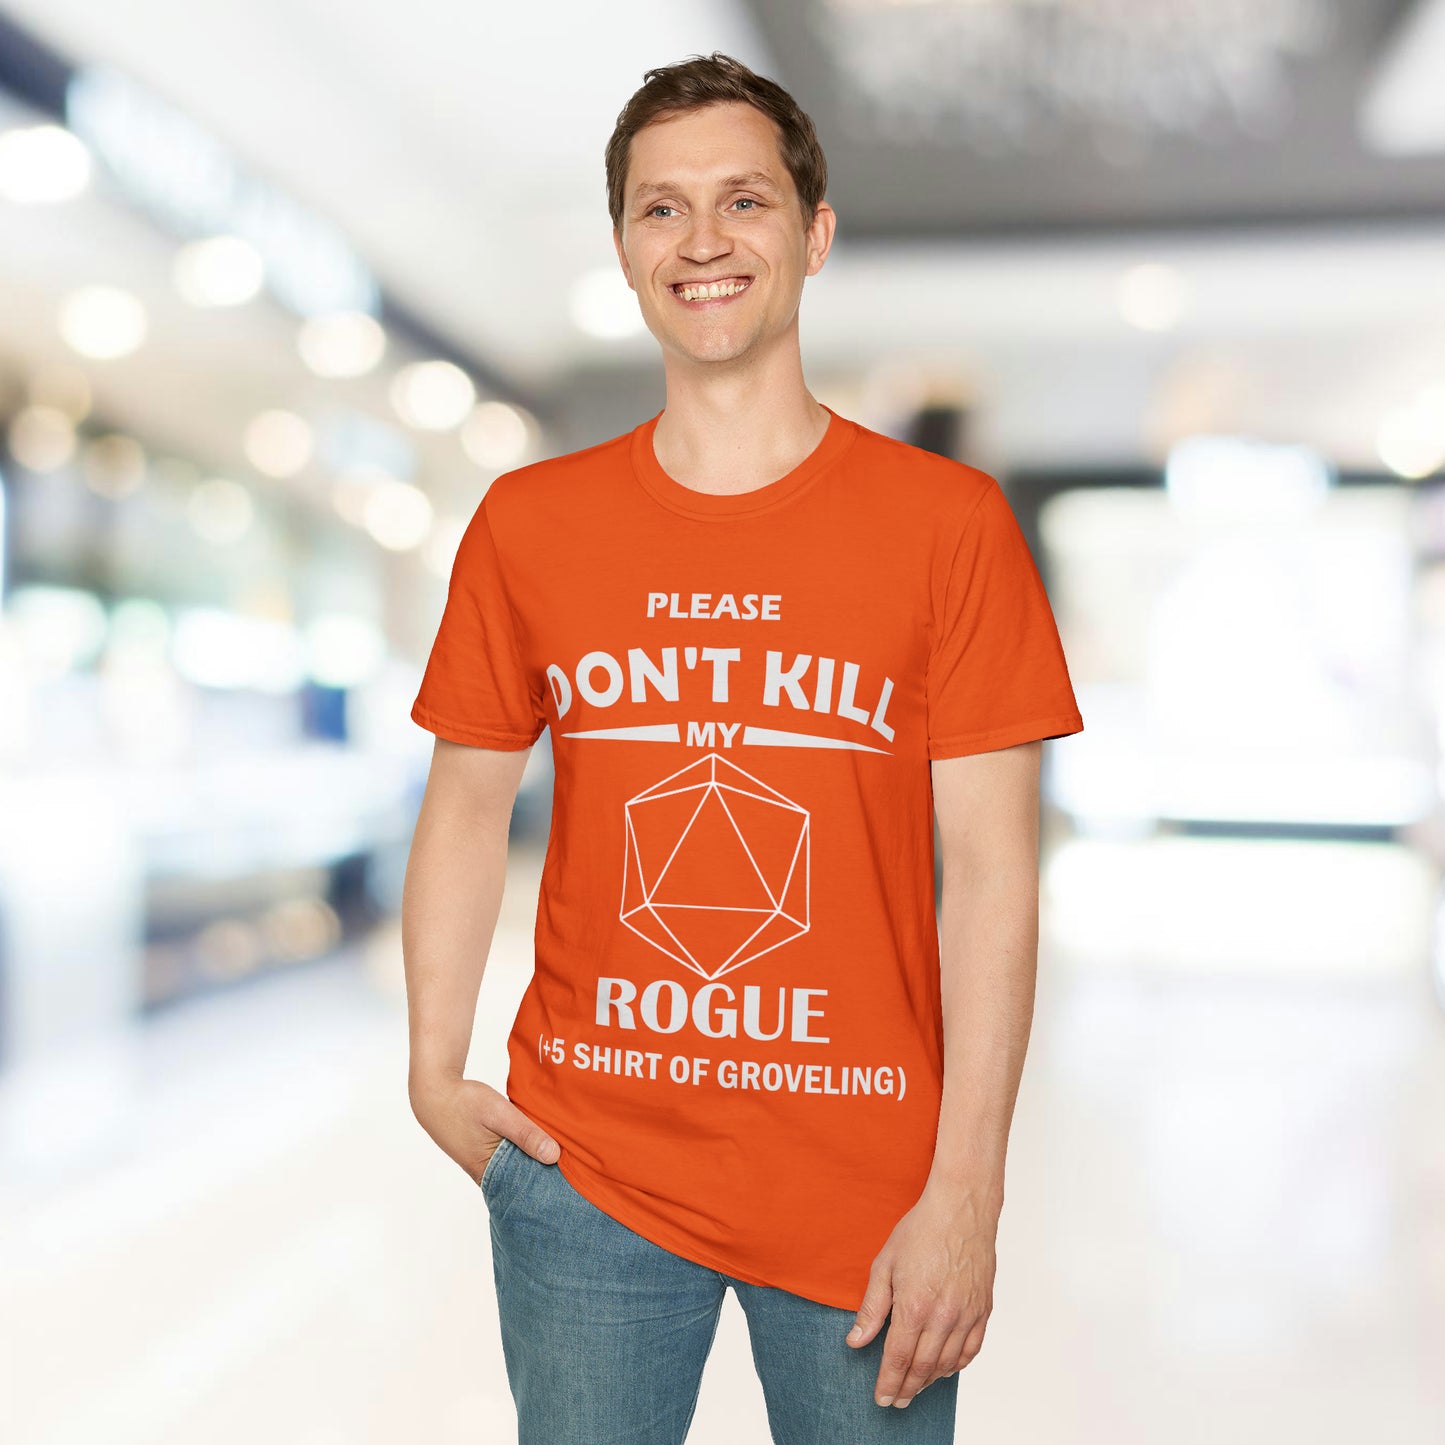 Please Don't Kill My Rogue - White - Unisex Softstyle T-Shirt